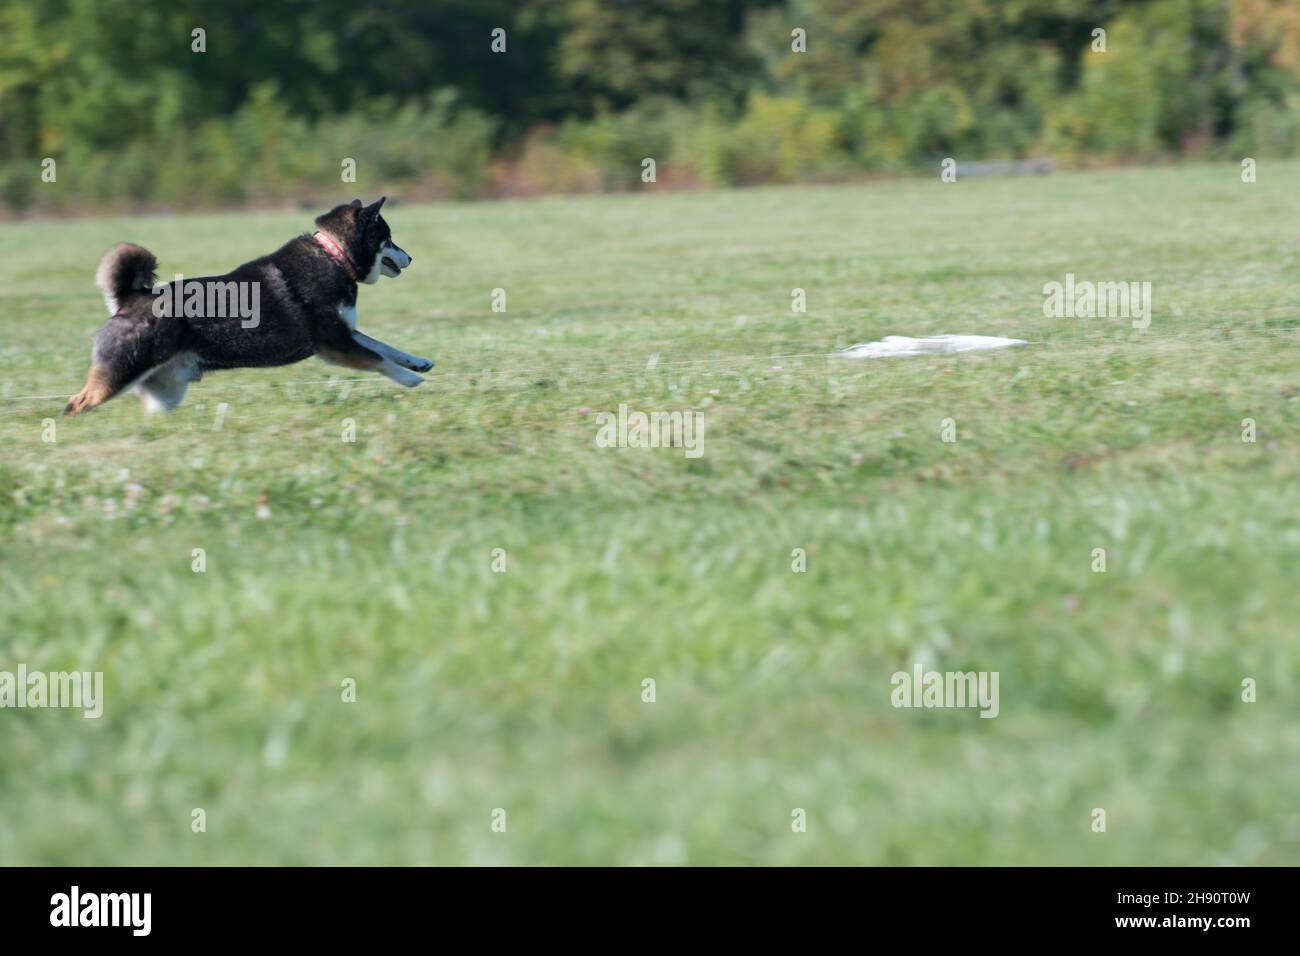 Siberian Husky chasing a lure in competition Stock Photo